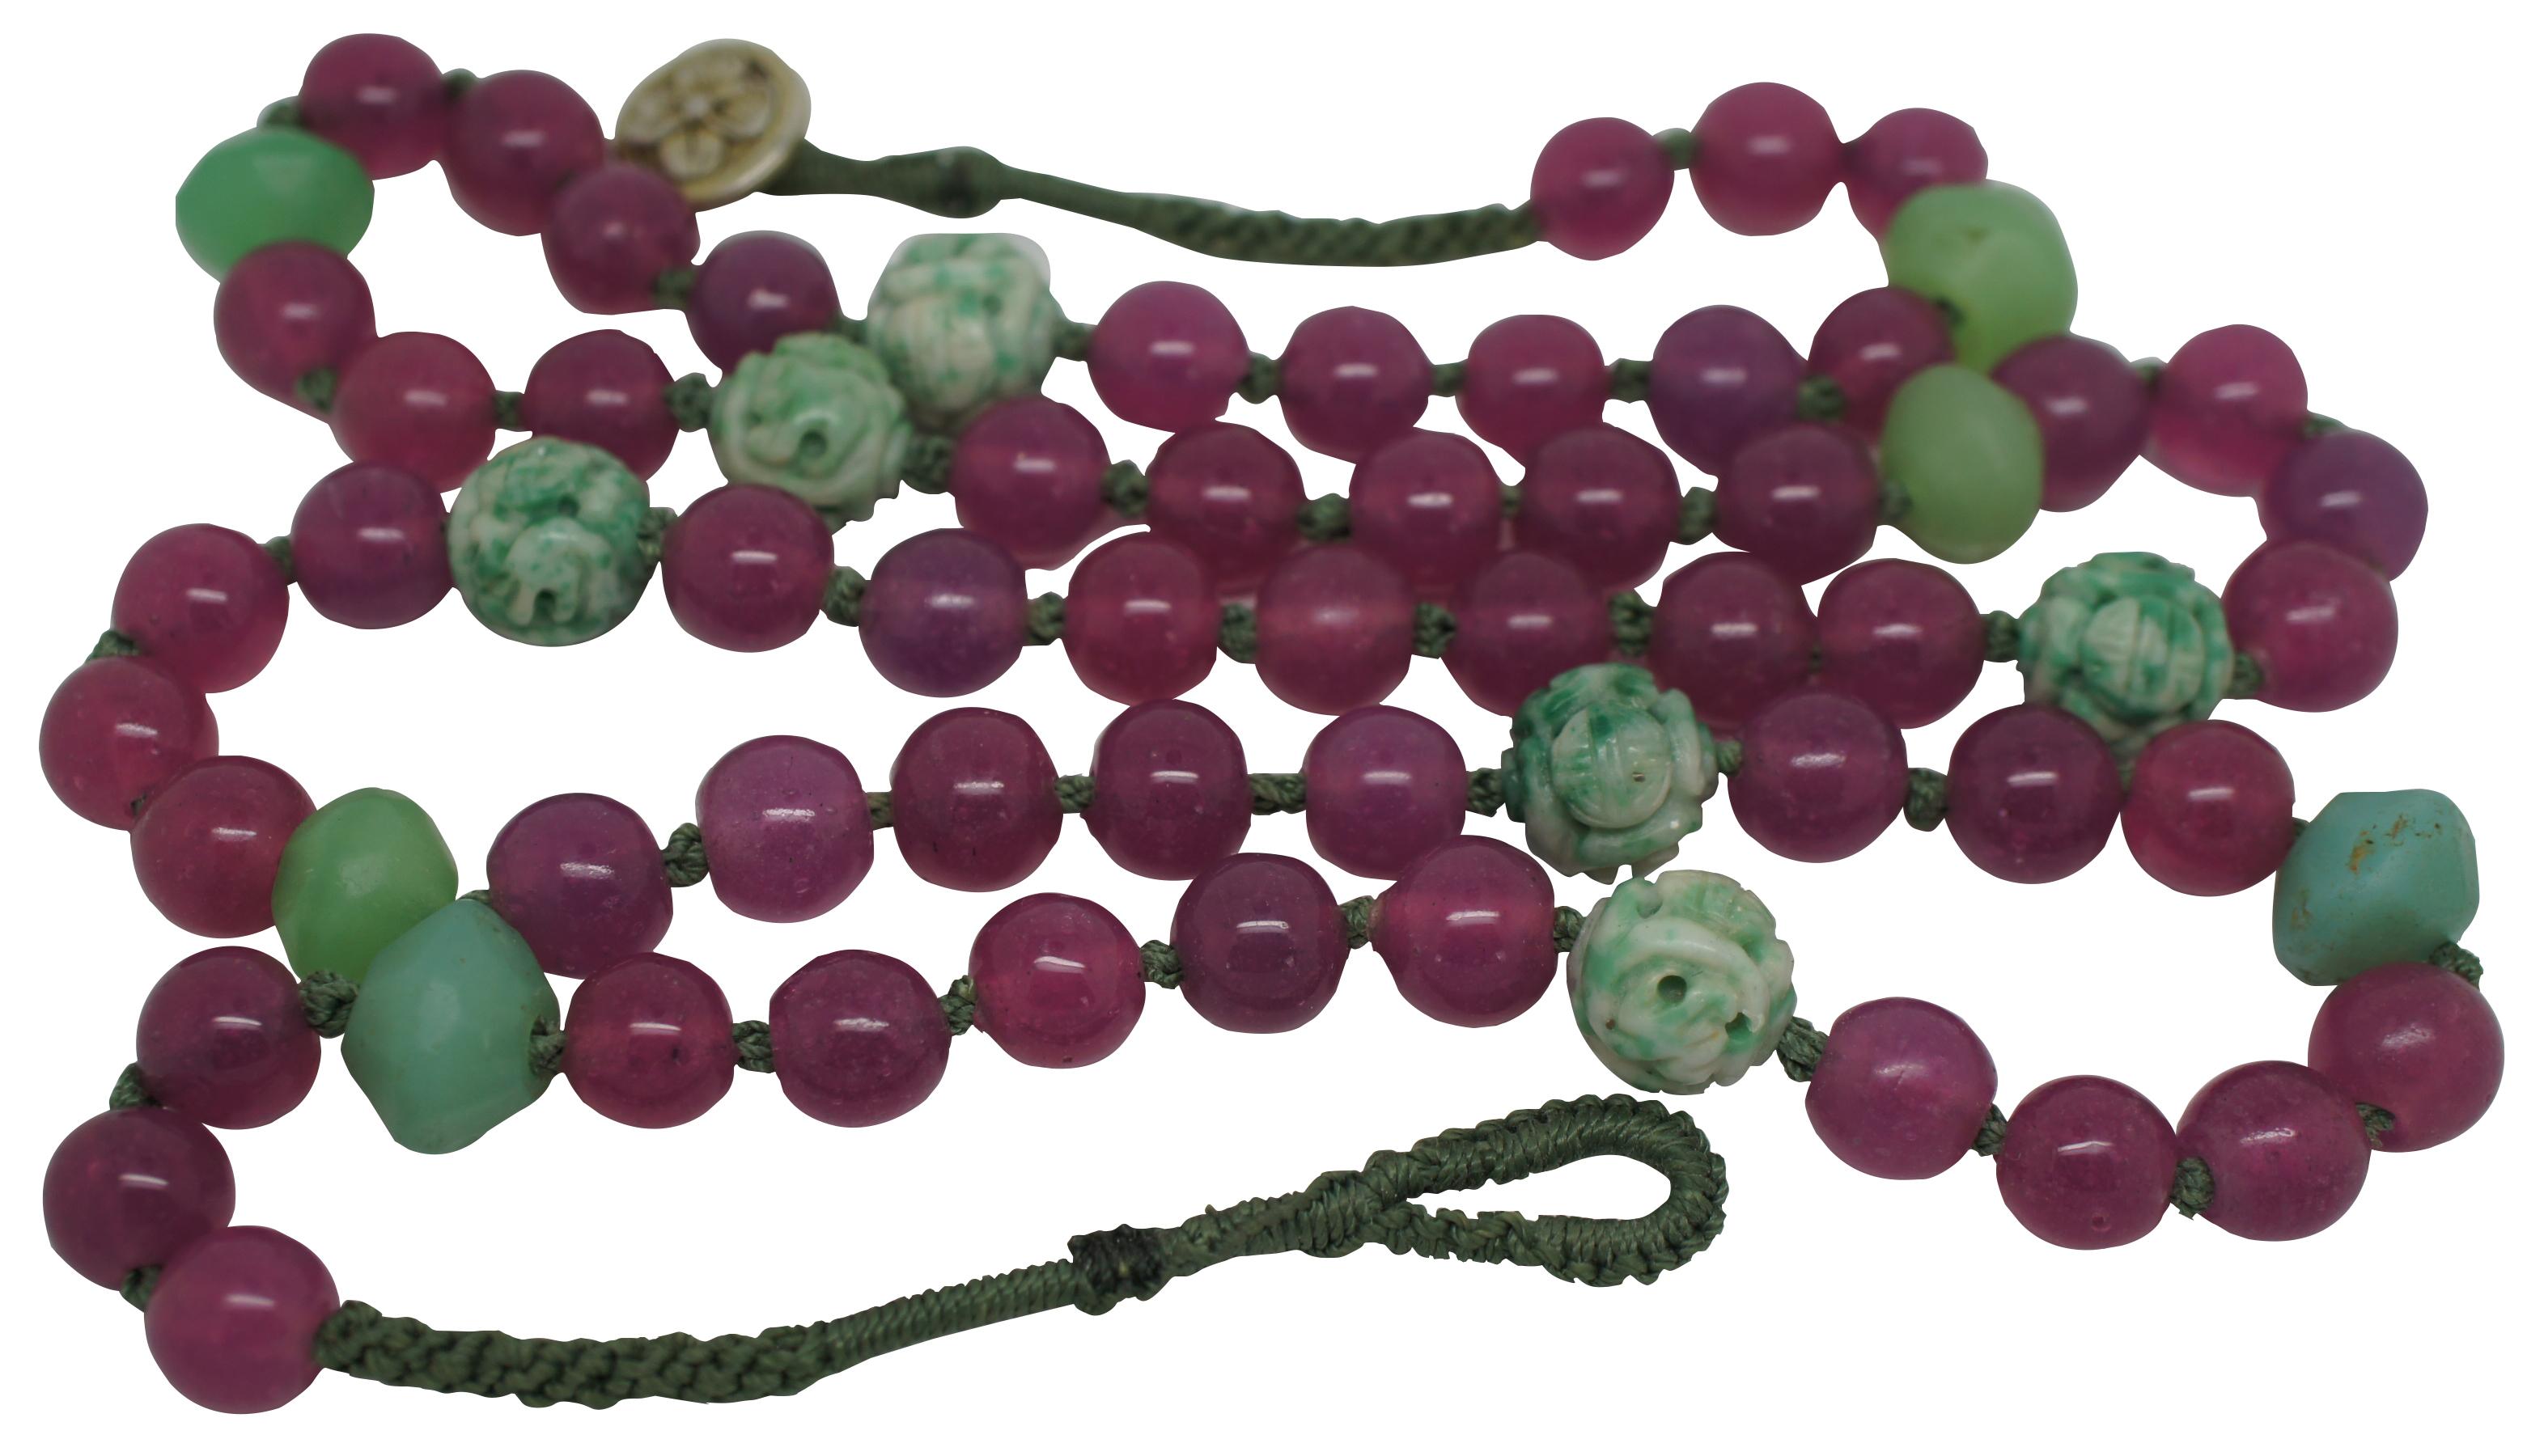 Vintage necklace of long alternating naturally irregular and carved Chinese dragon jade beads, and pink / magenta glass beads strung on a hand knotted cord. Measures: 40